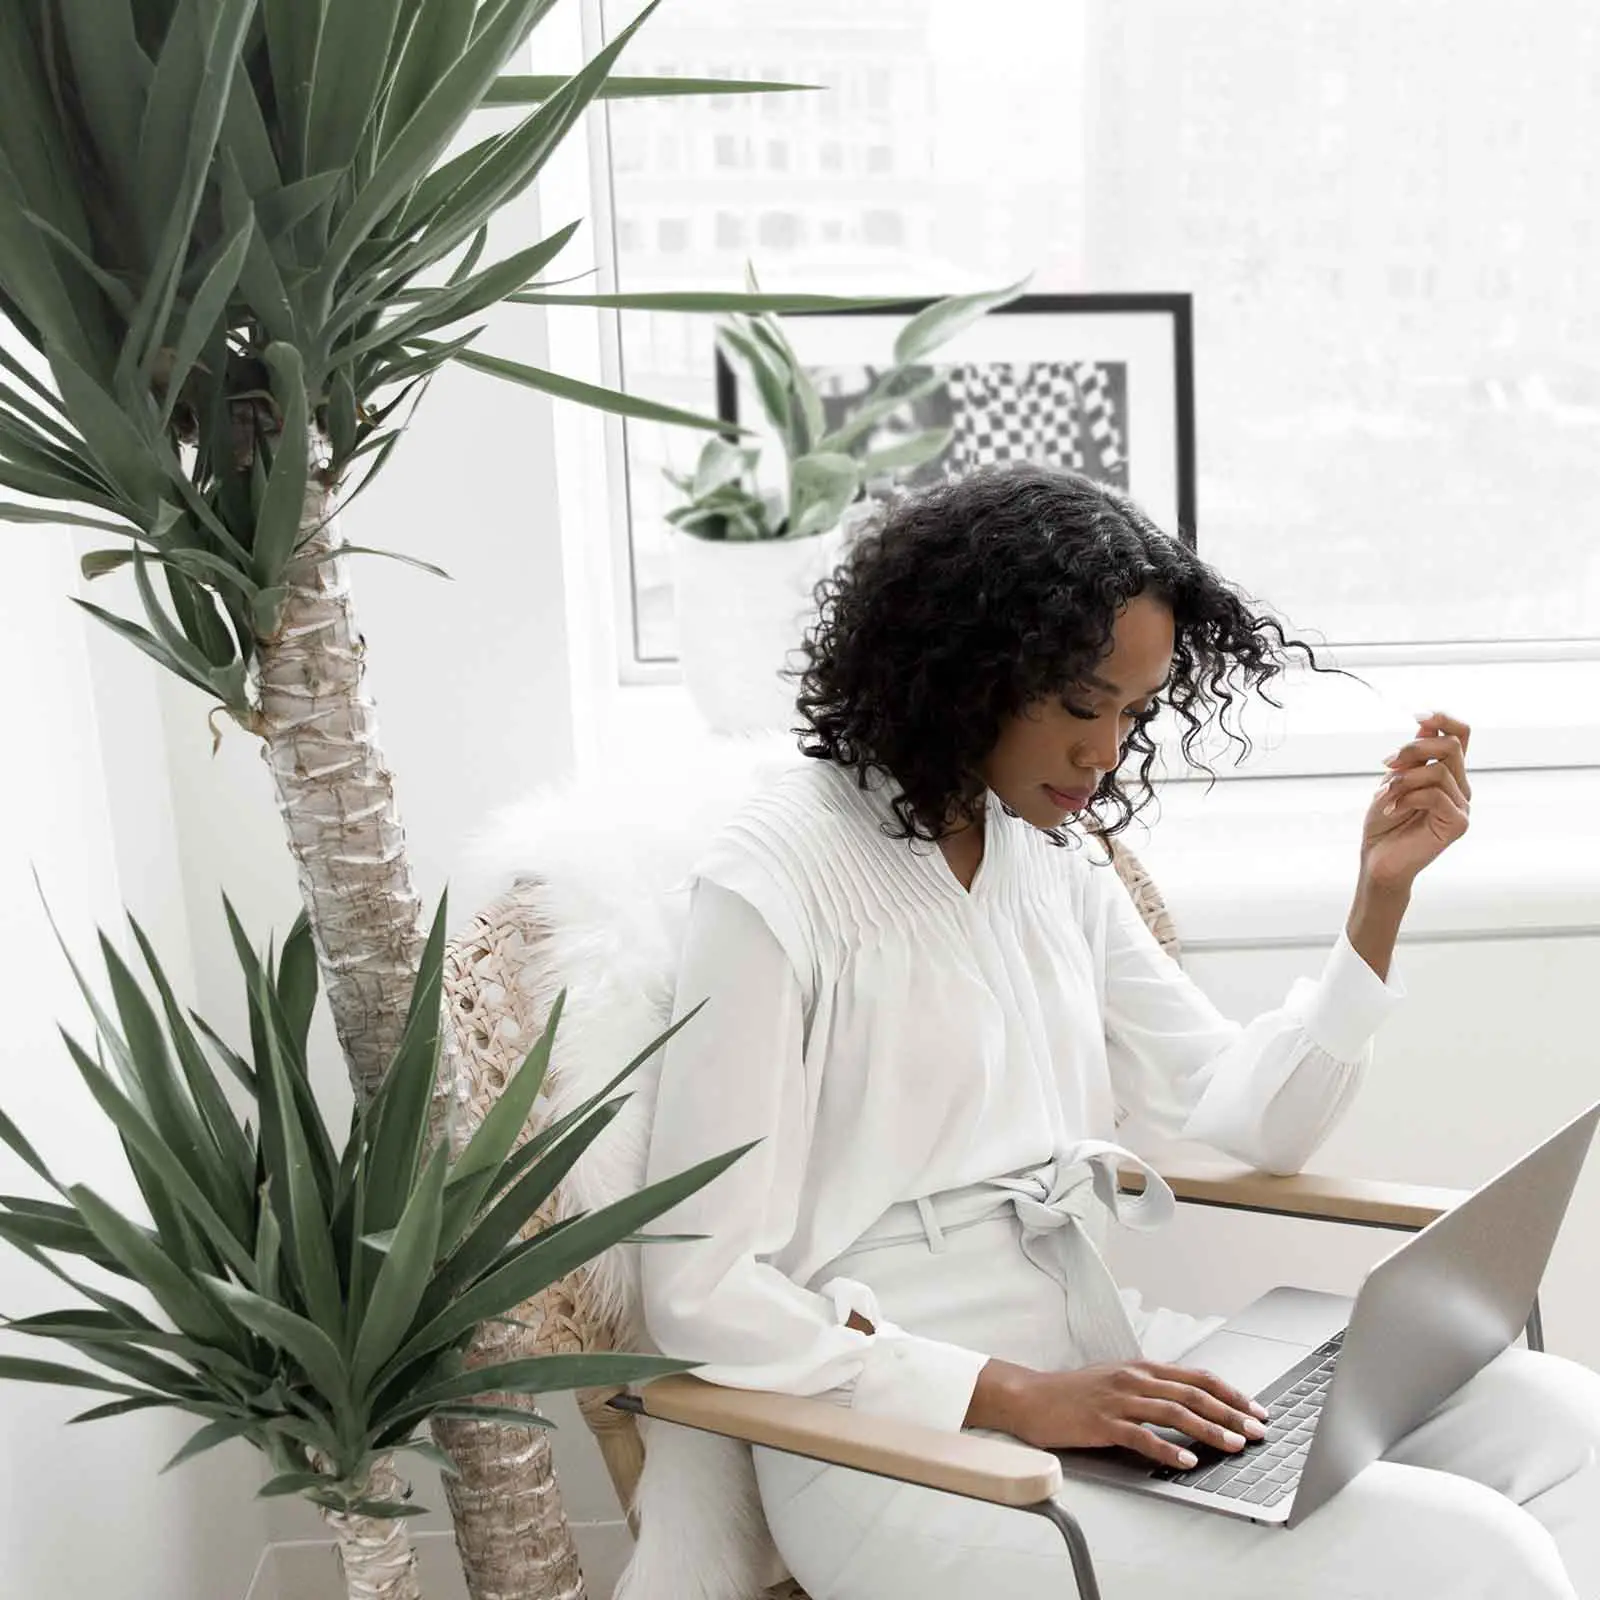 Photo of a woman wearing a white blouse and light grey pants reading something on her laptop while twirling her curly hair with one hand.